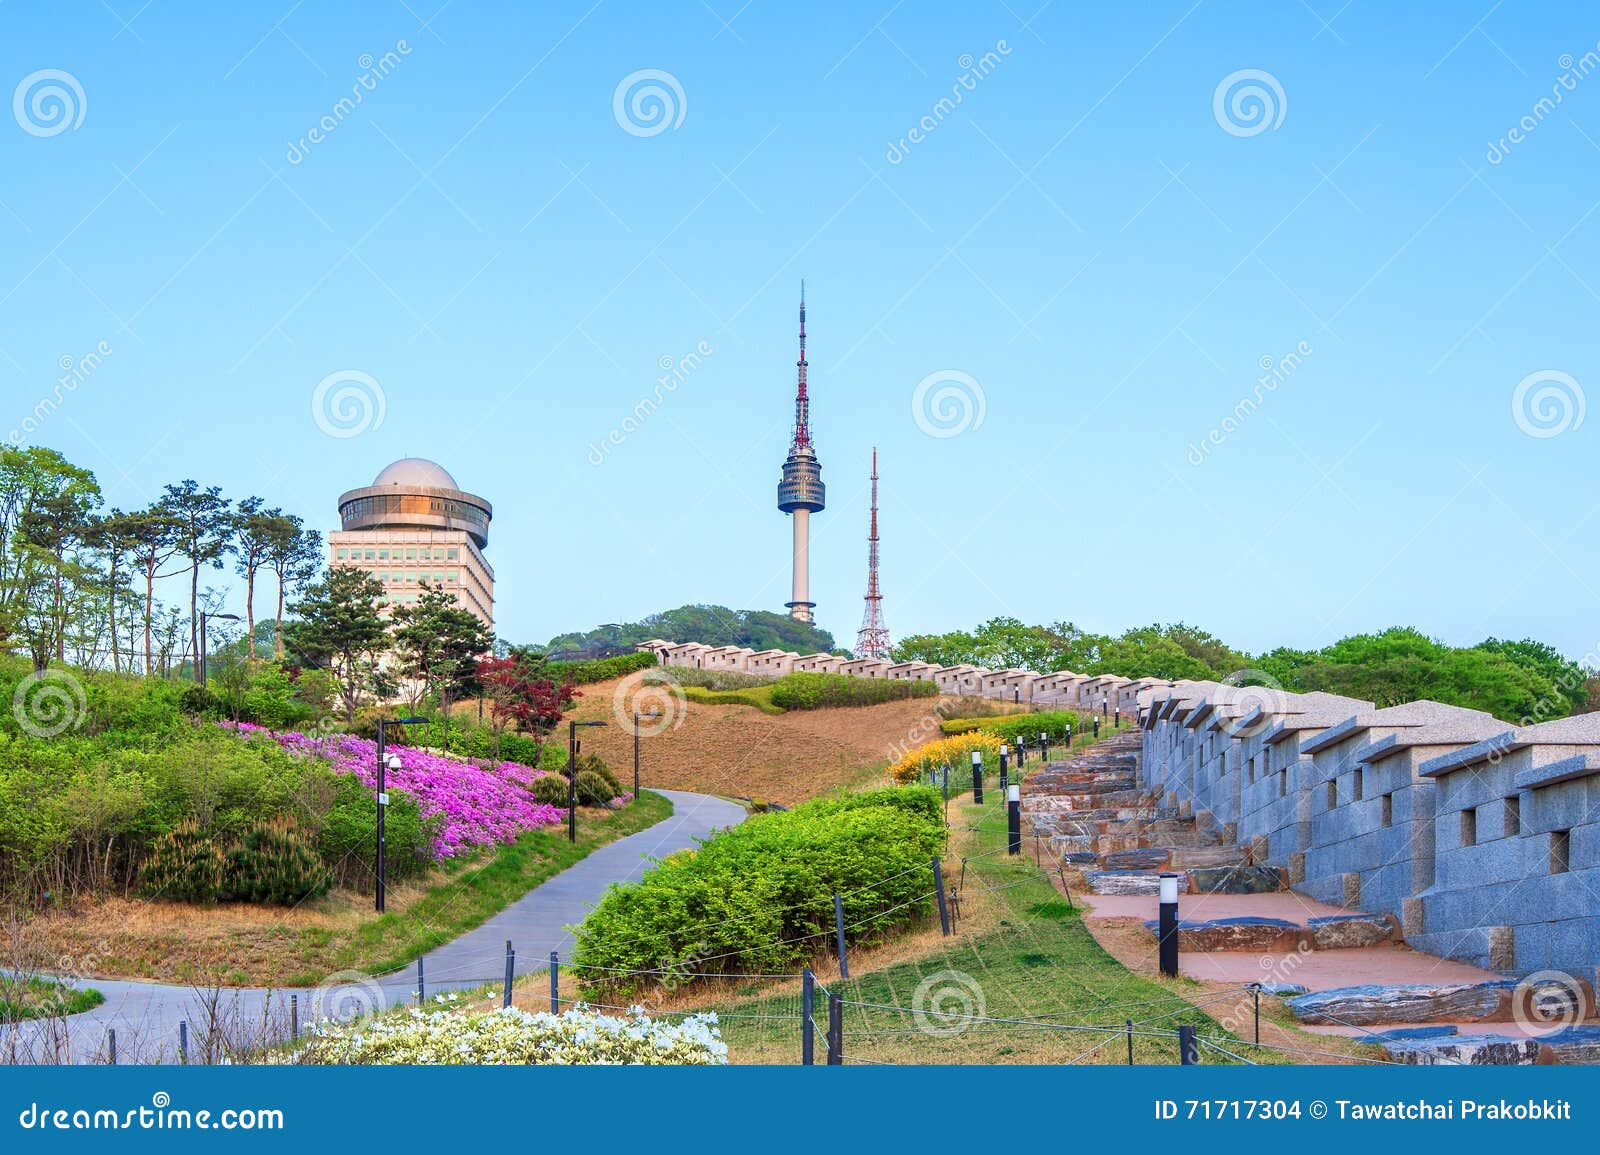 n seoul tower located on namsan mountain in central seoul, korea.